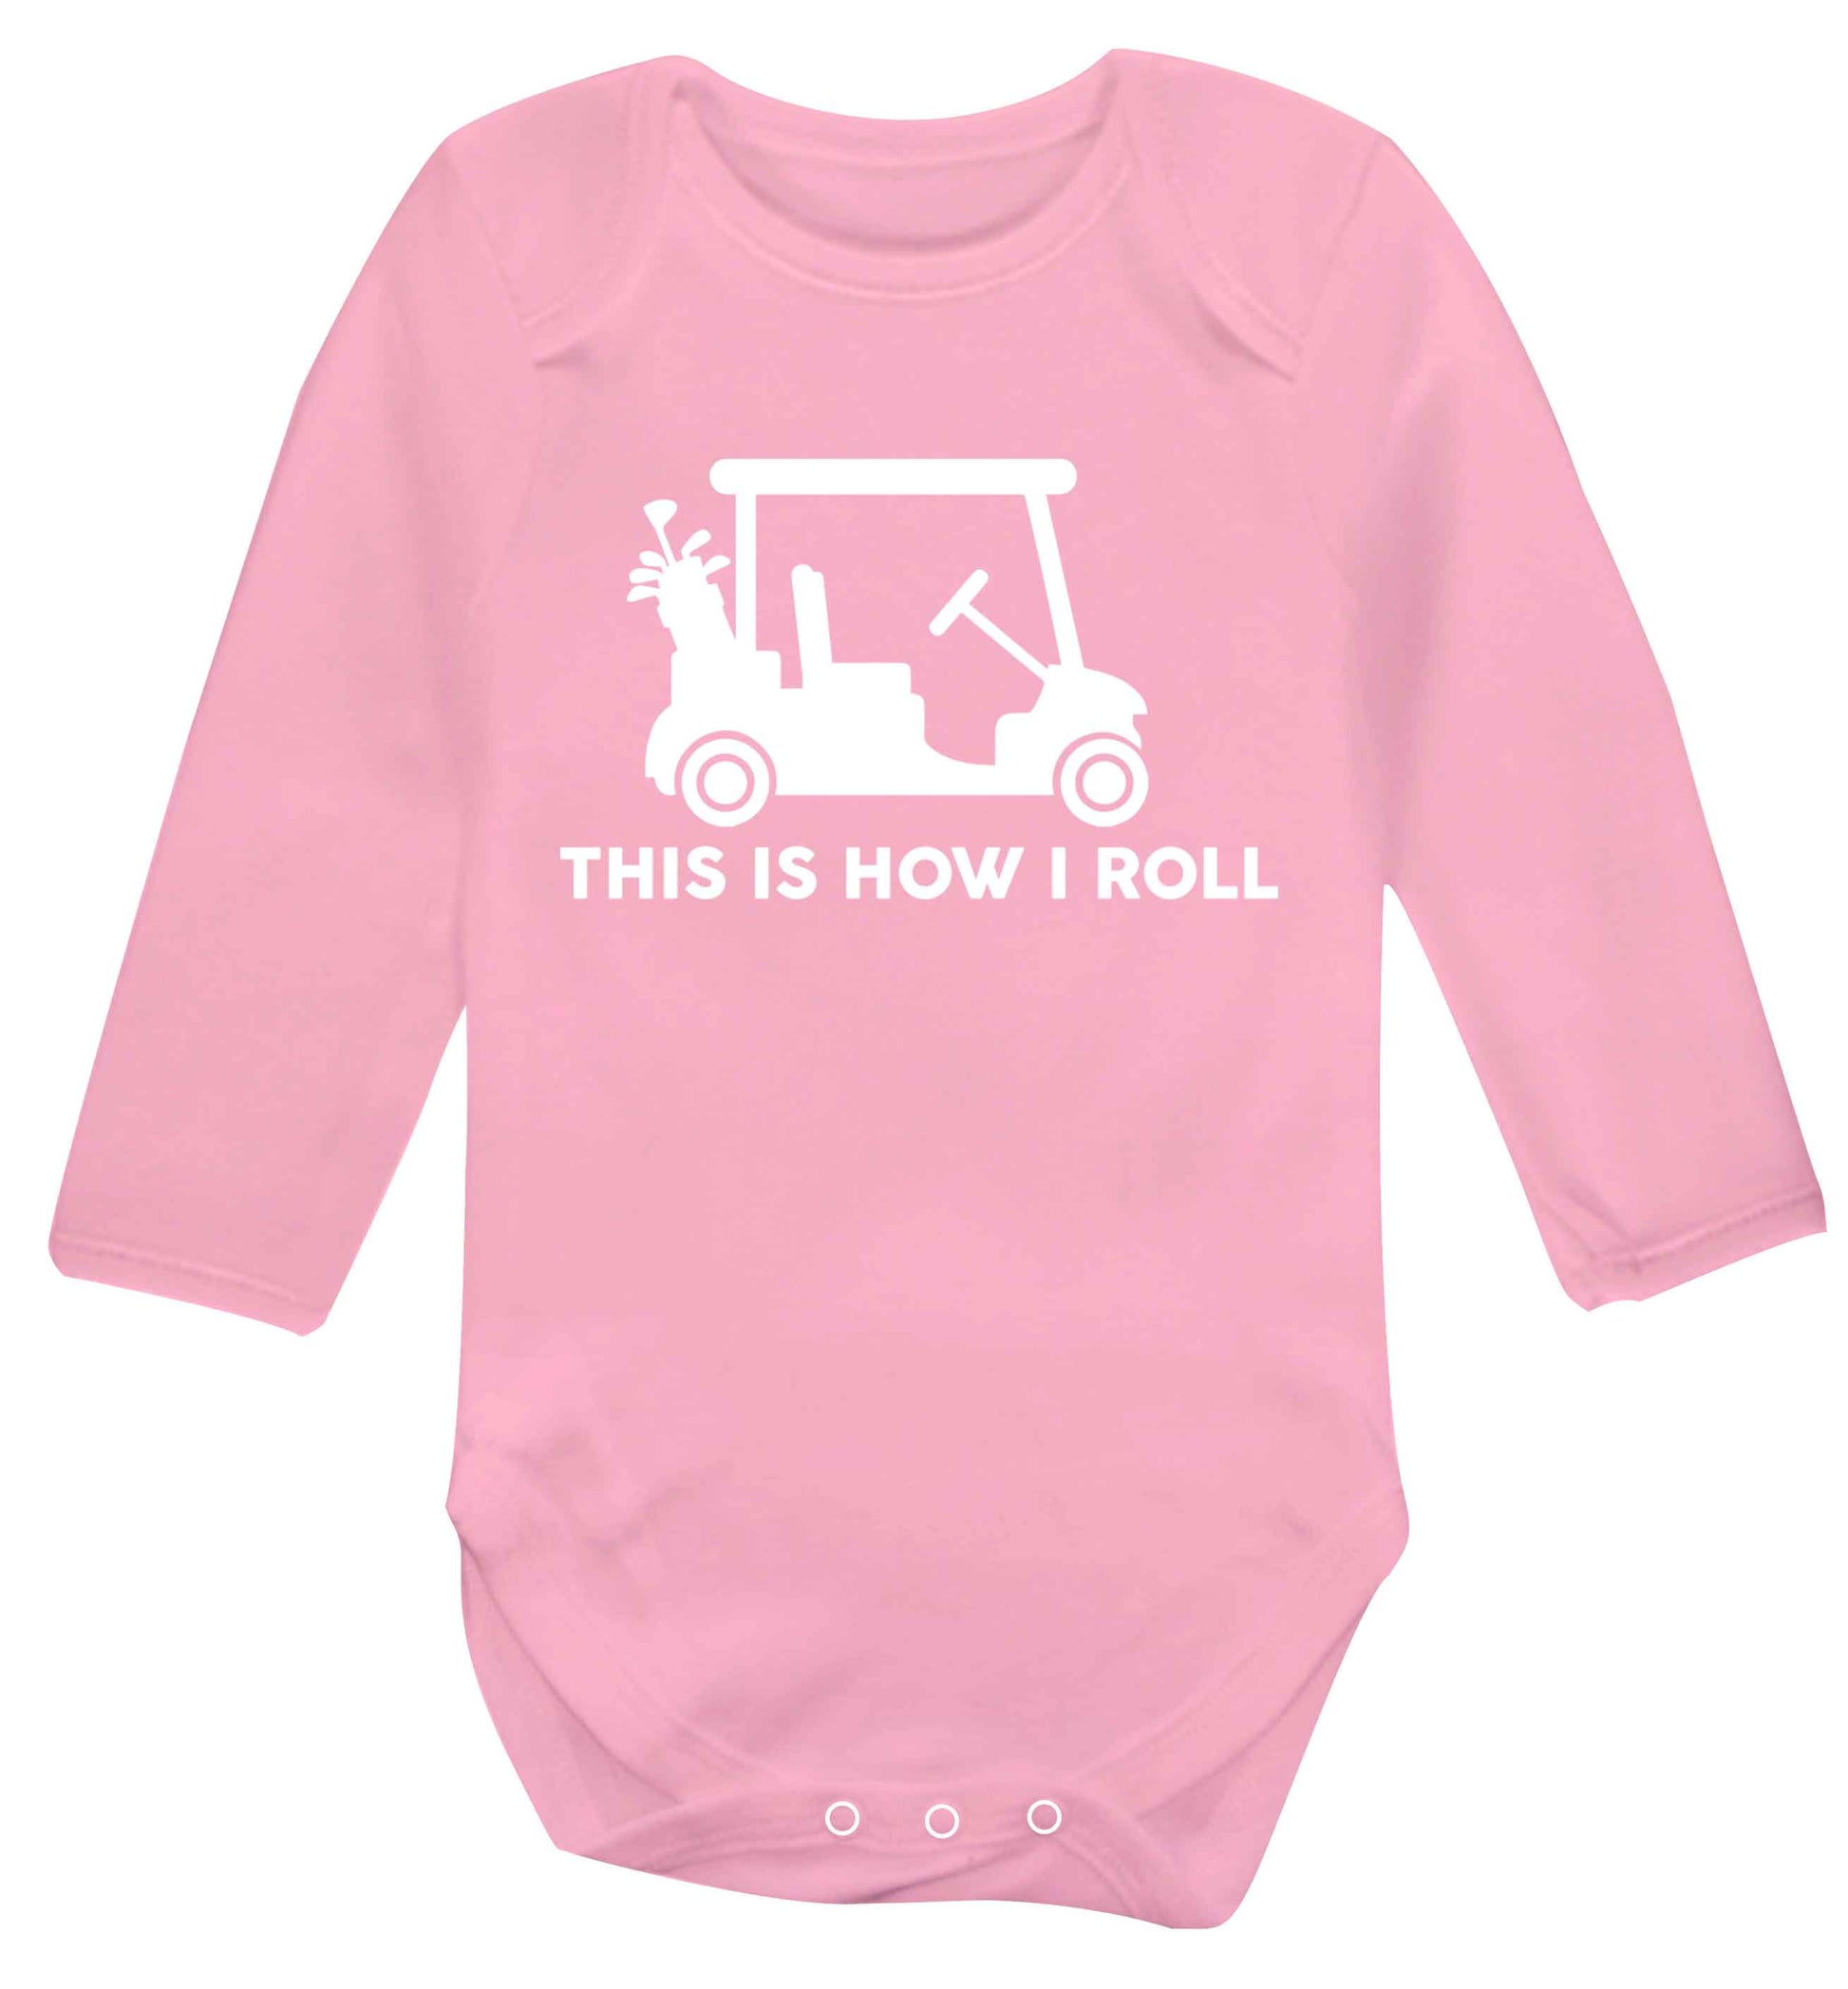 This is how I roll golf cart Baby Vest long sleeved pale pink 6-12 months